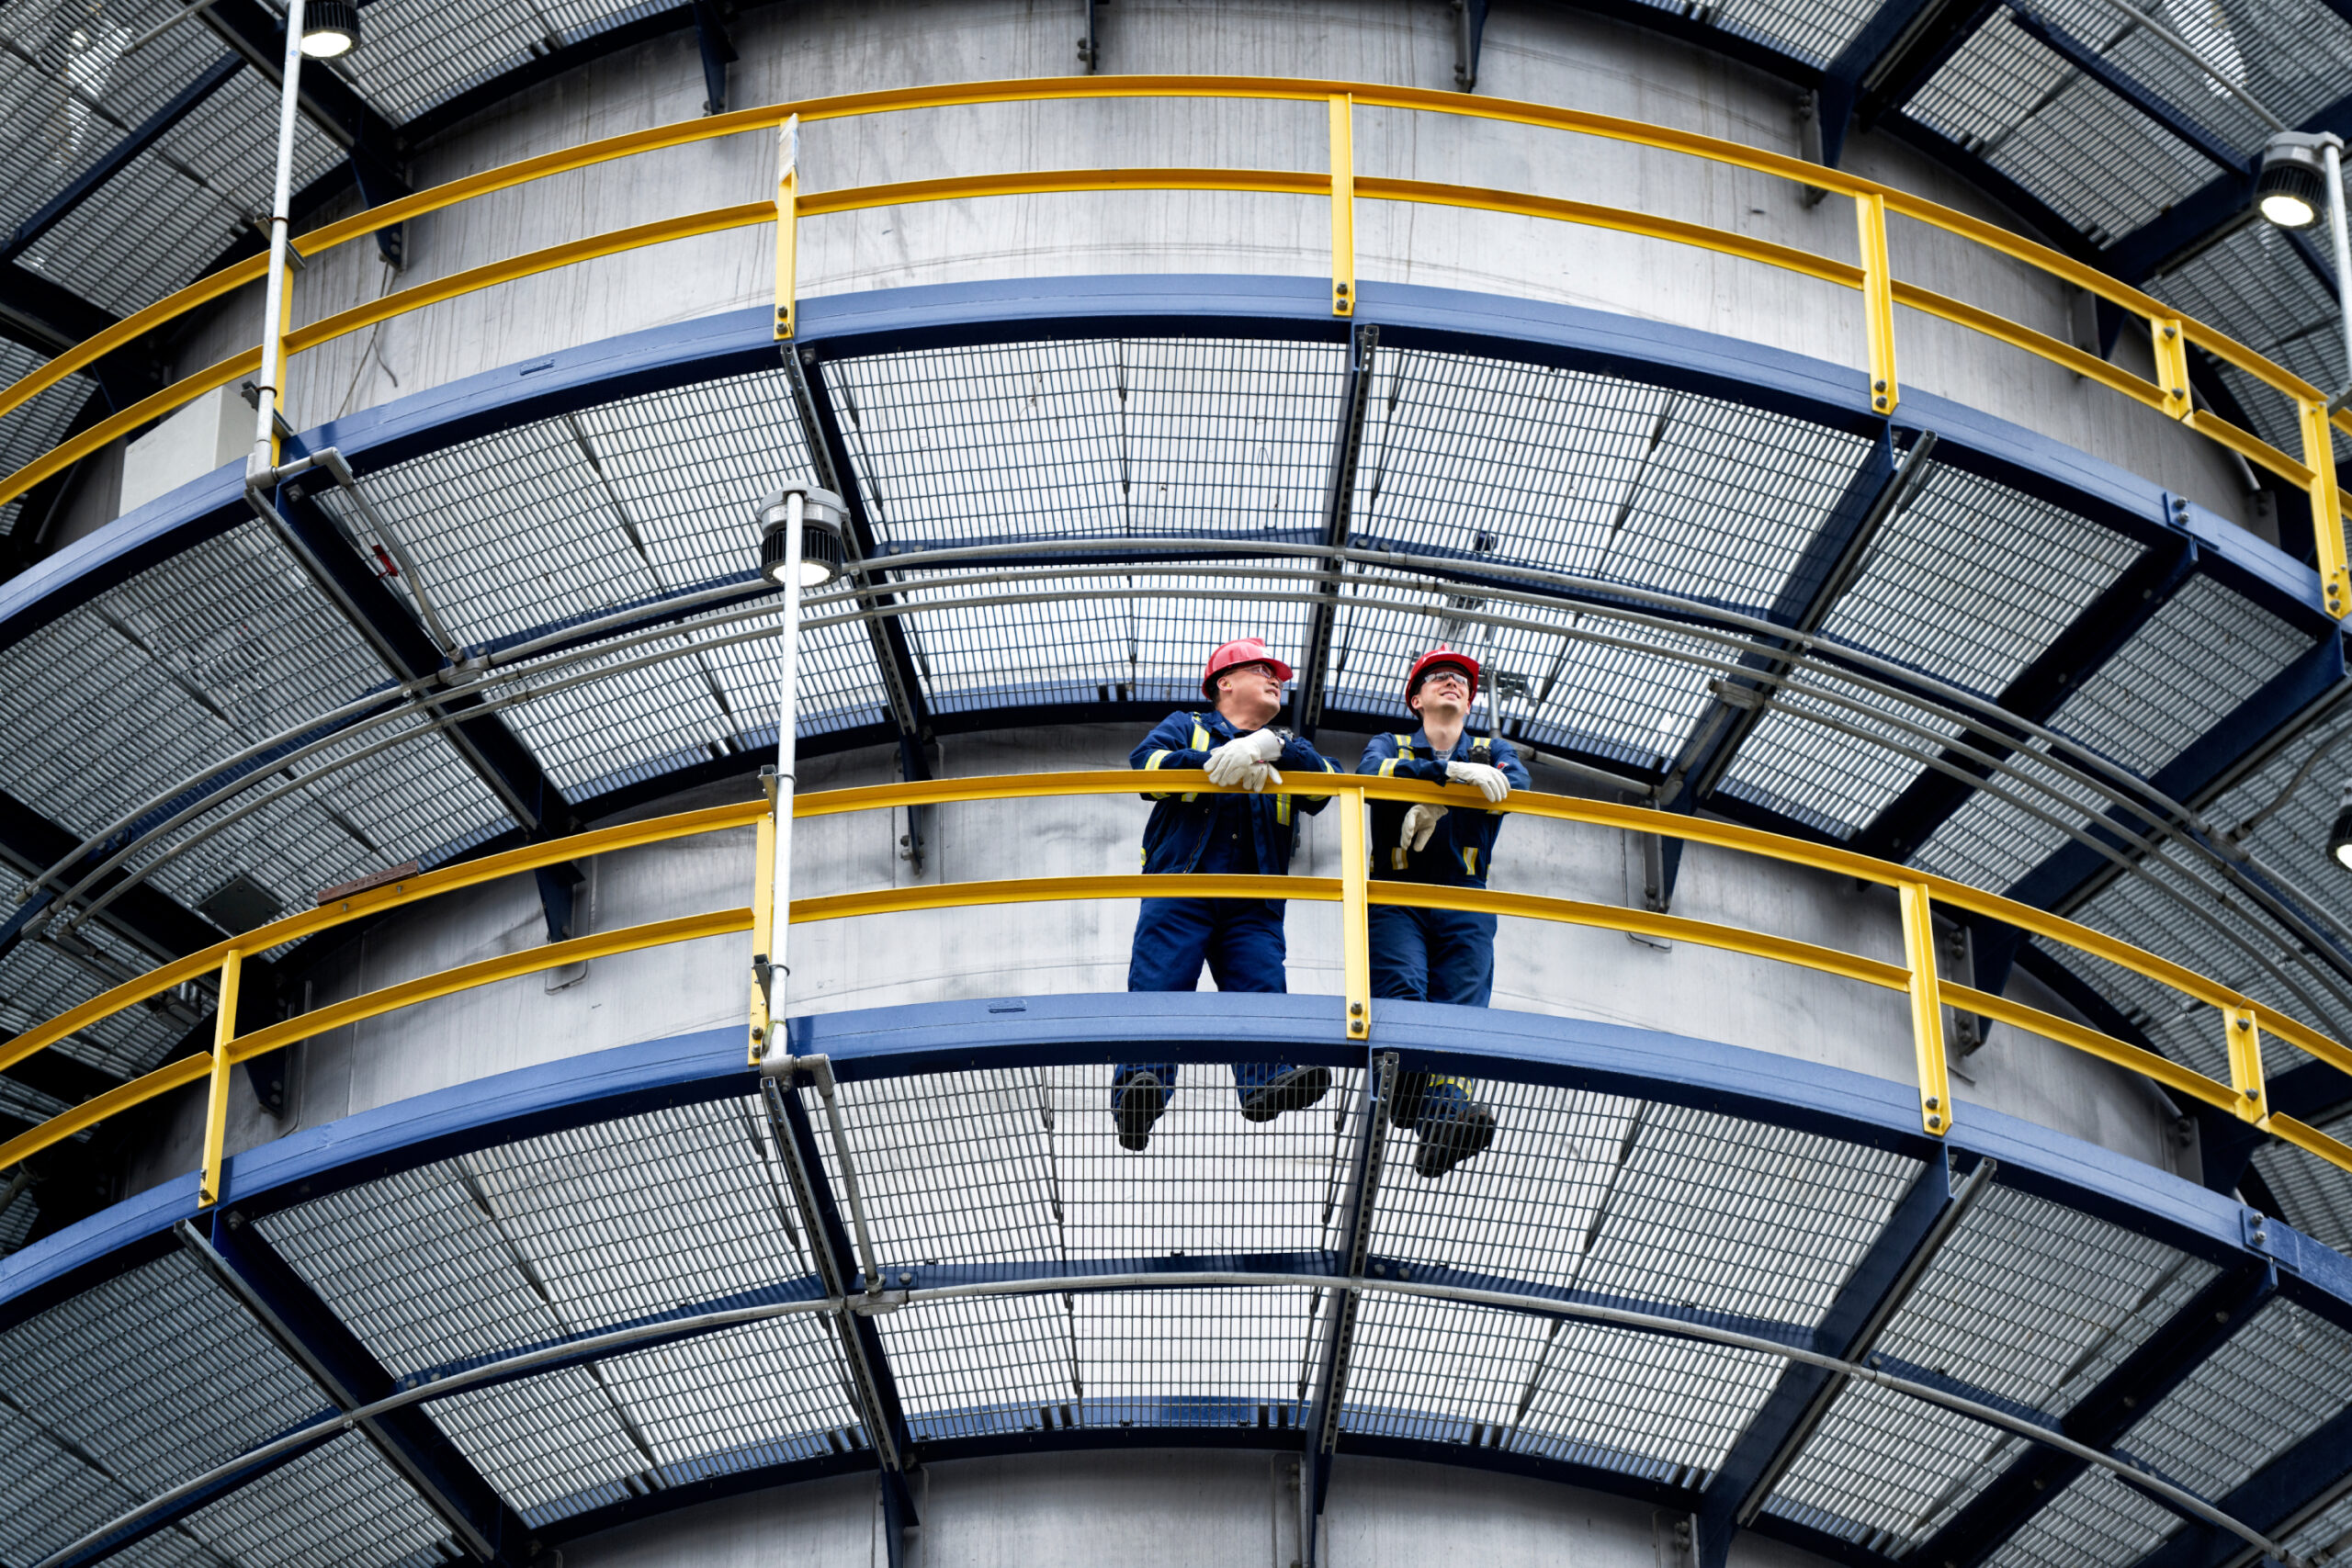 Two people talking at an operating facility. They're wearing red hard hats, gloves, protective safety glasses and blue uniforms with reflective stripes.